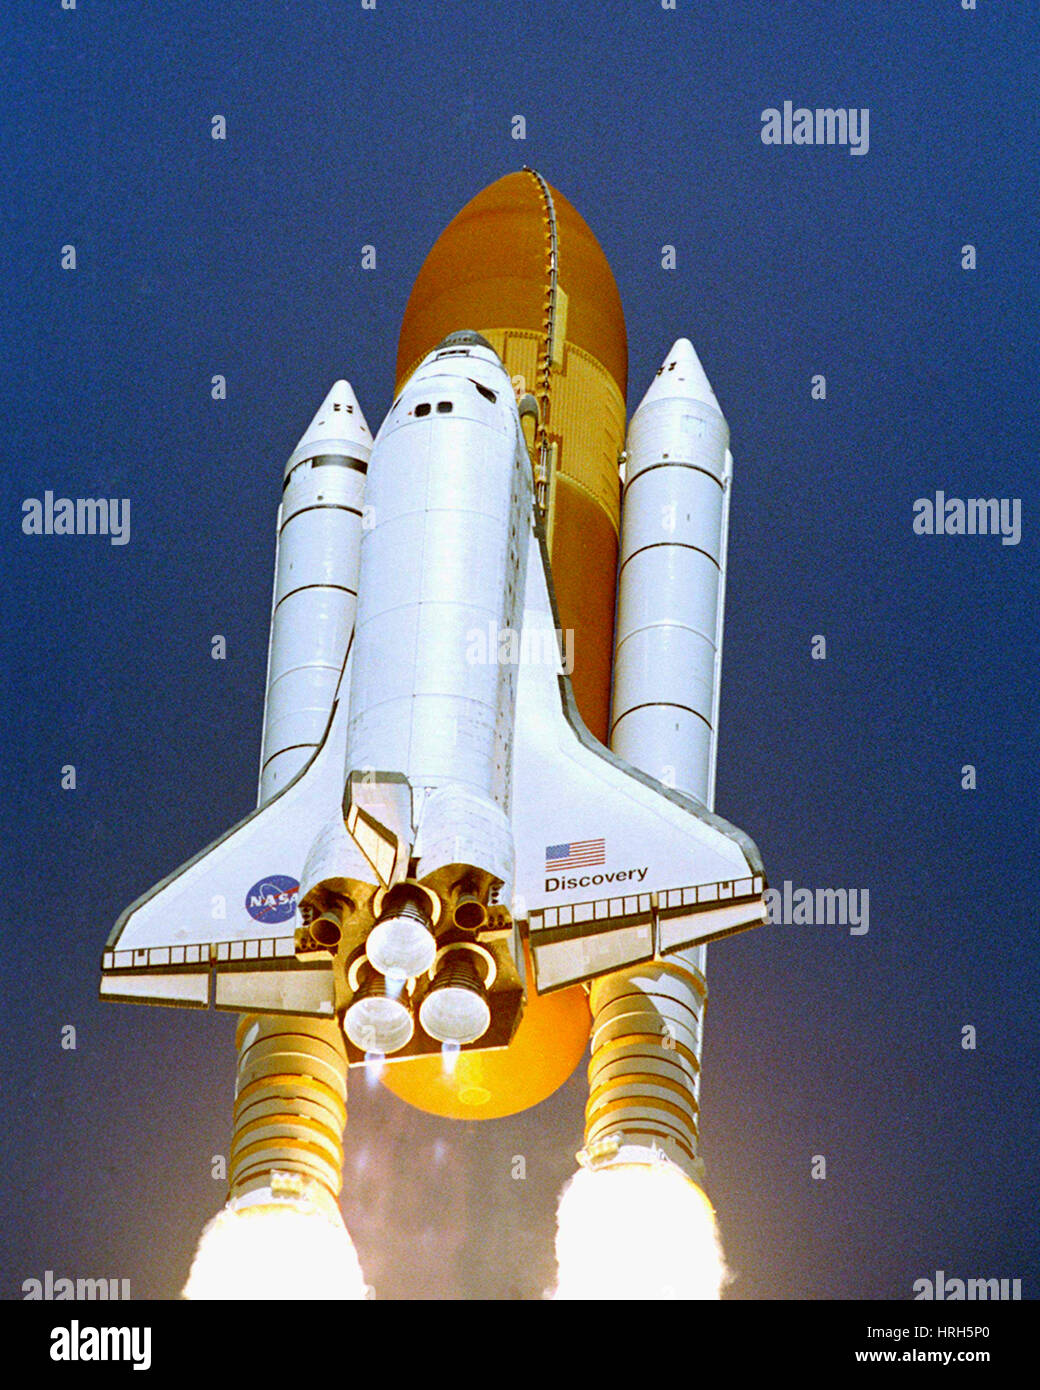 STS-114, Space Shuttle Discovery starten, 2005 Stockfoto